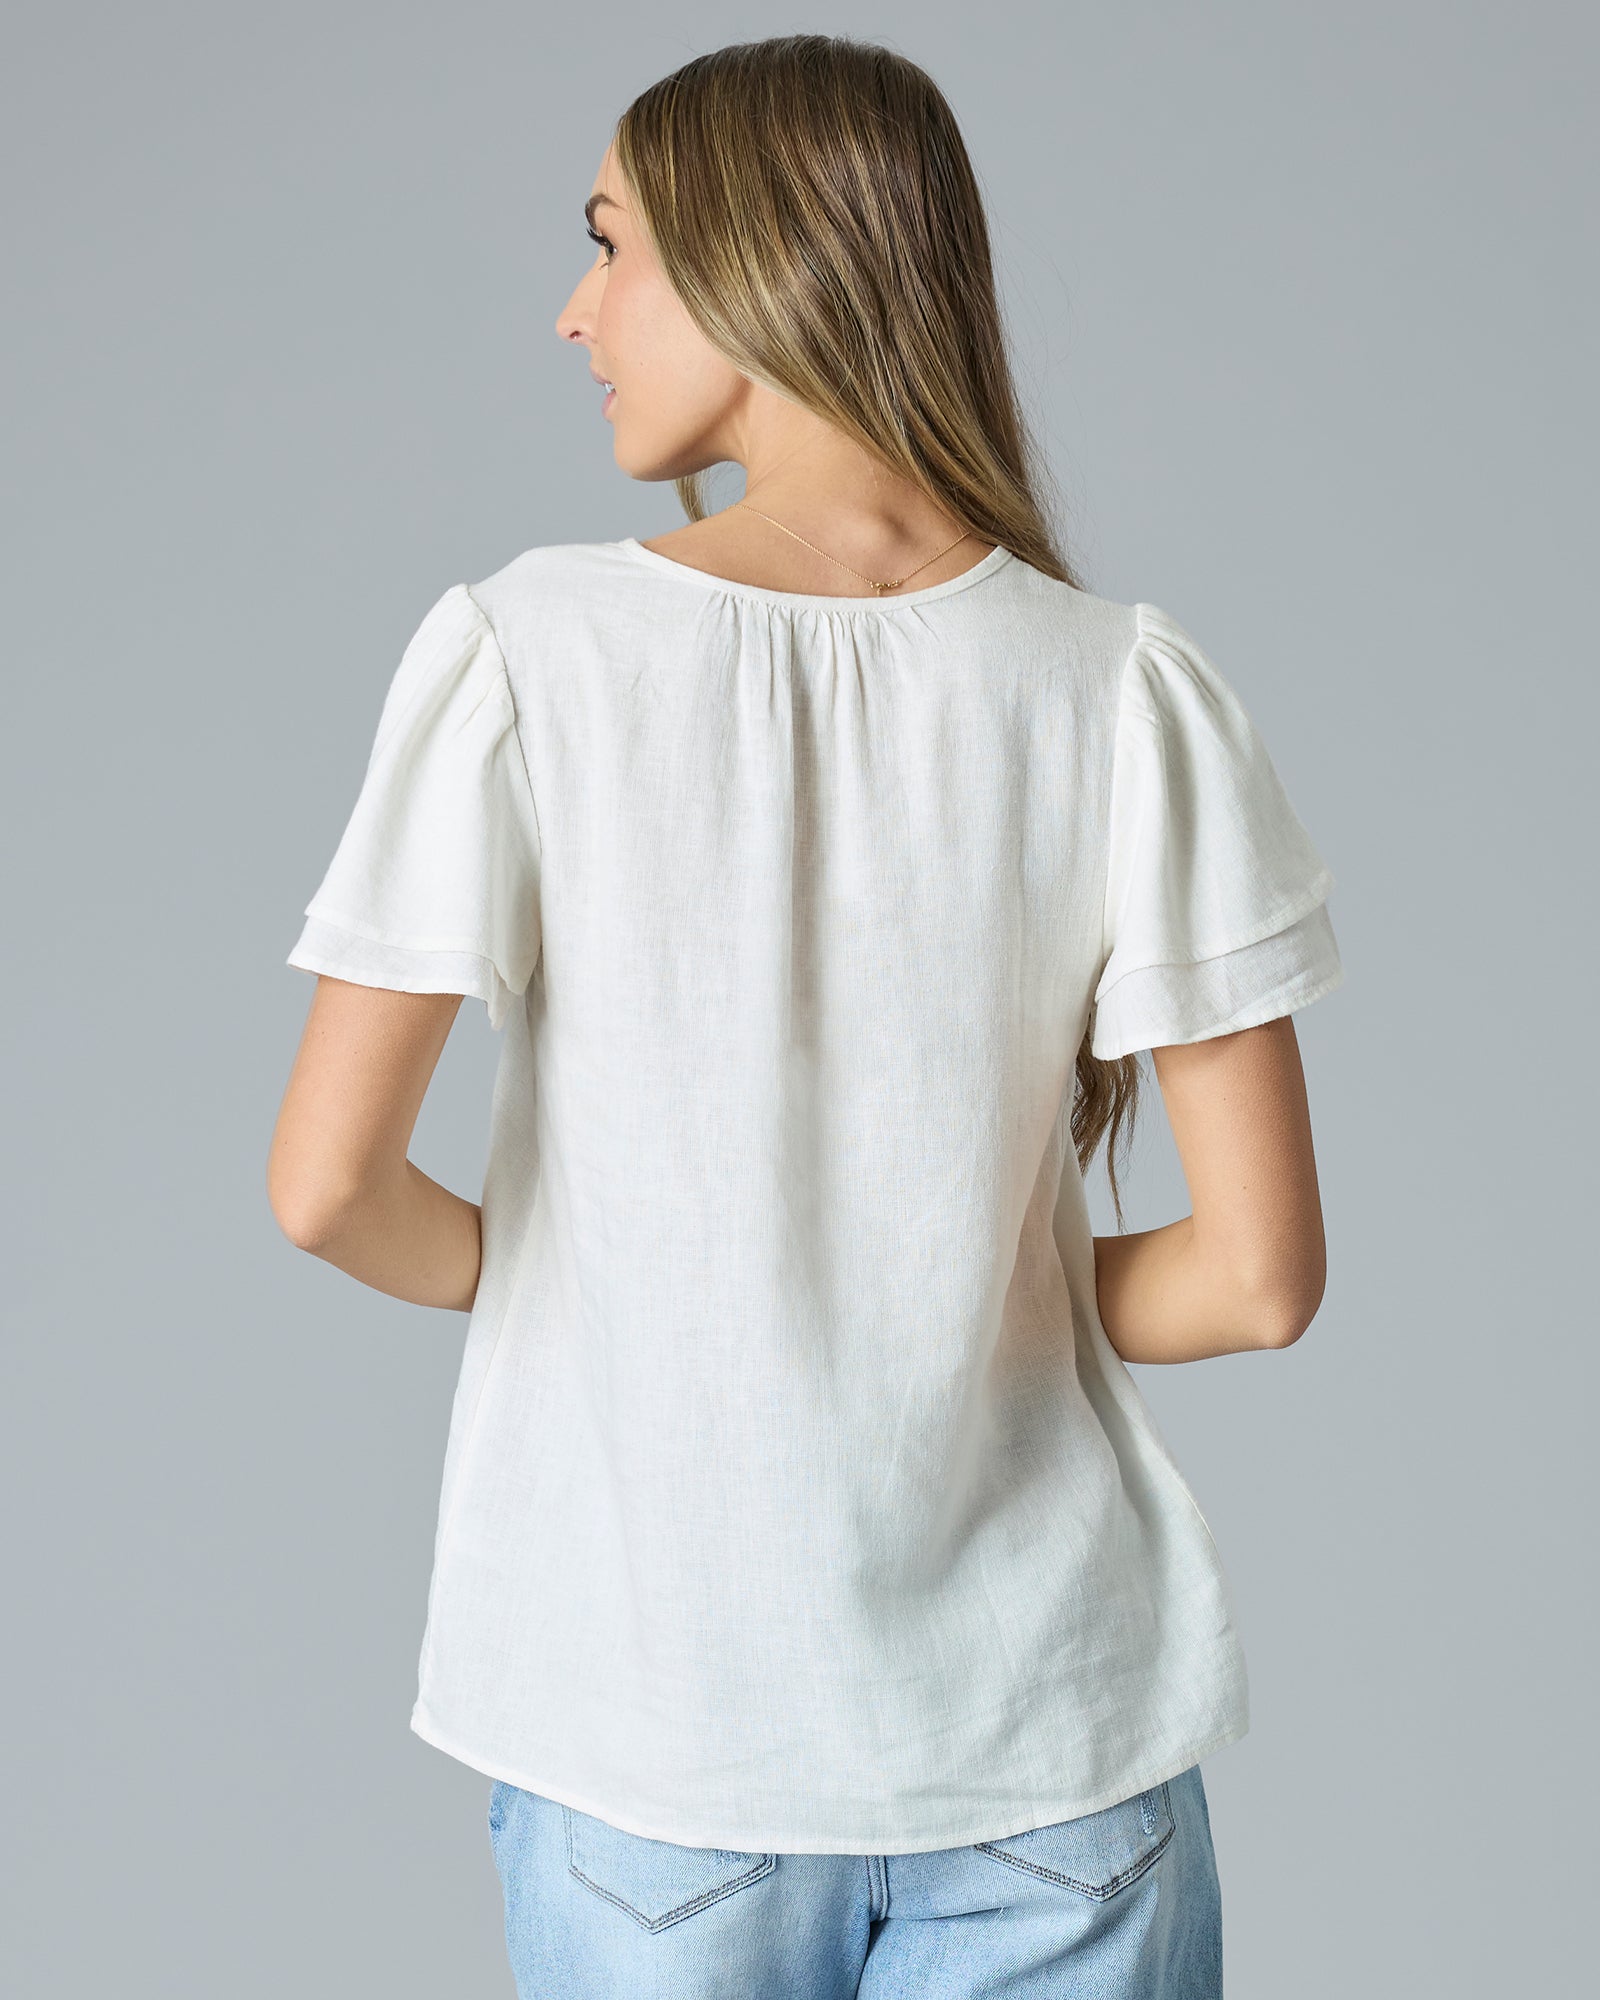 Back view of woman in cream colored short sleeve, v-neck linen blouse